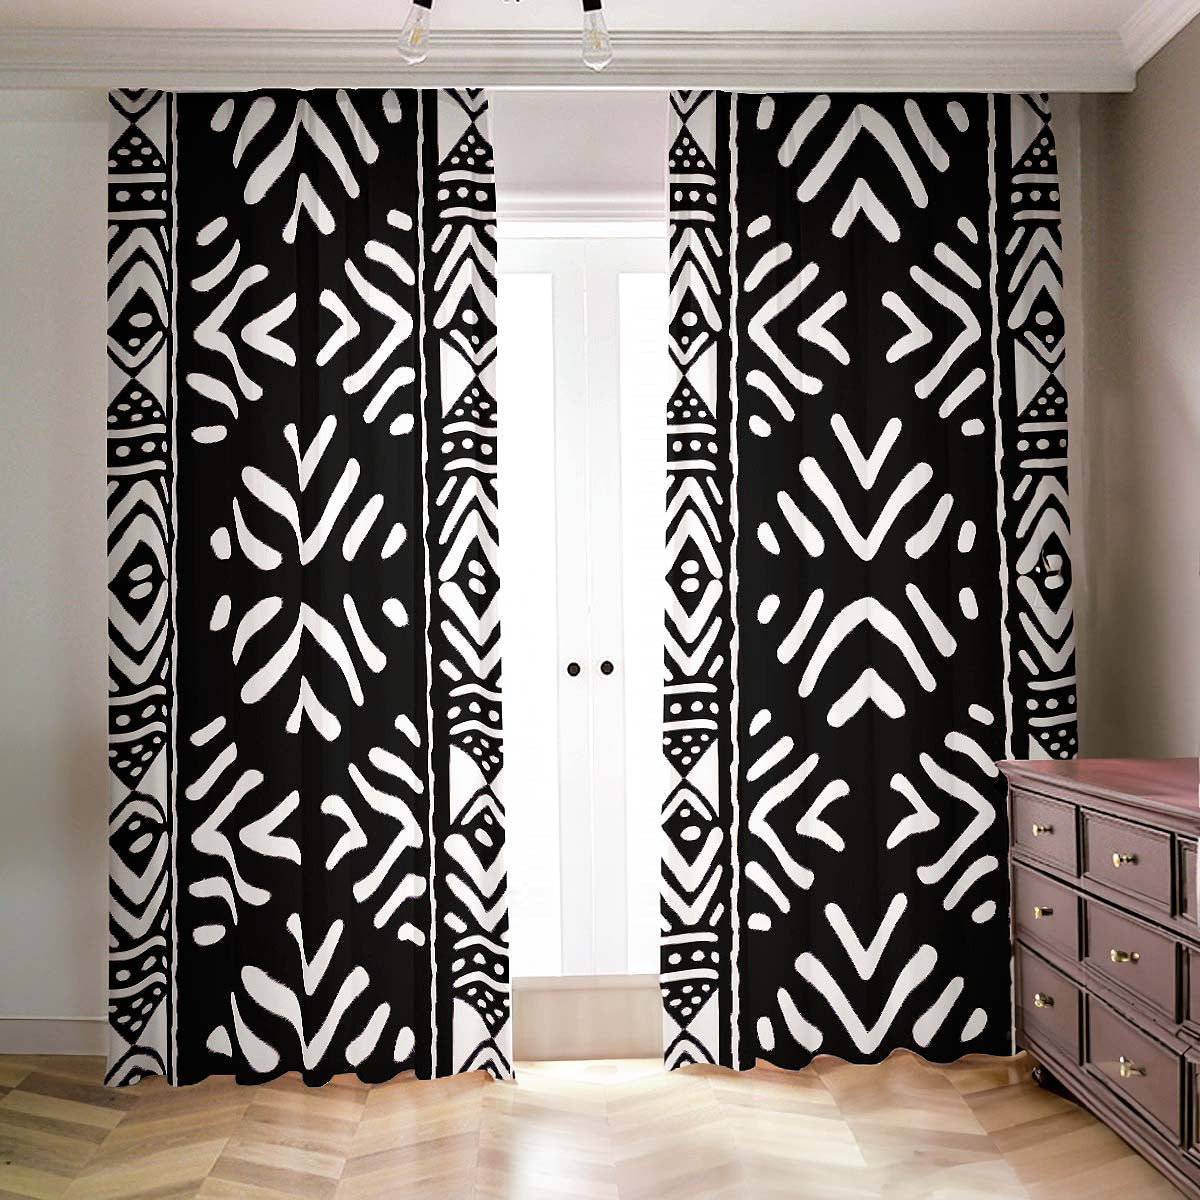 African Style Blackout Curtains - Tribal Black & White Print